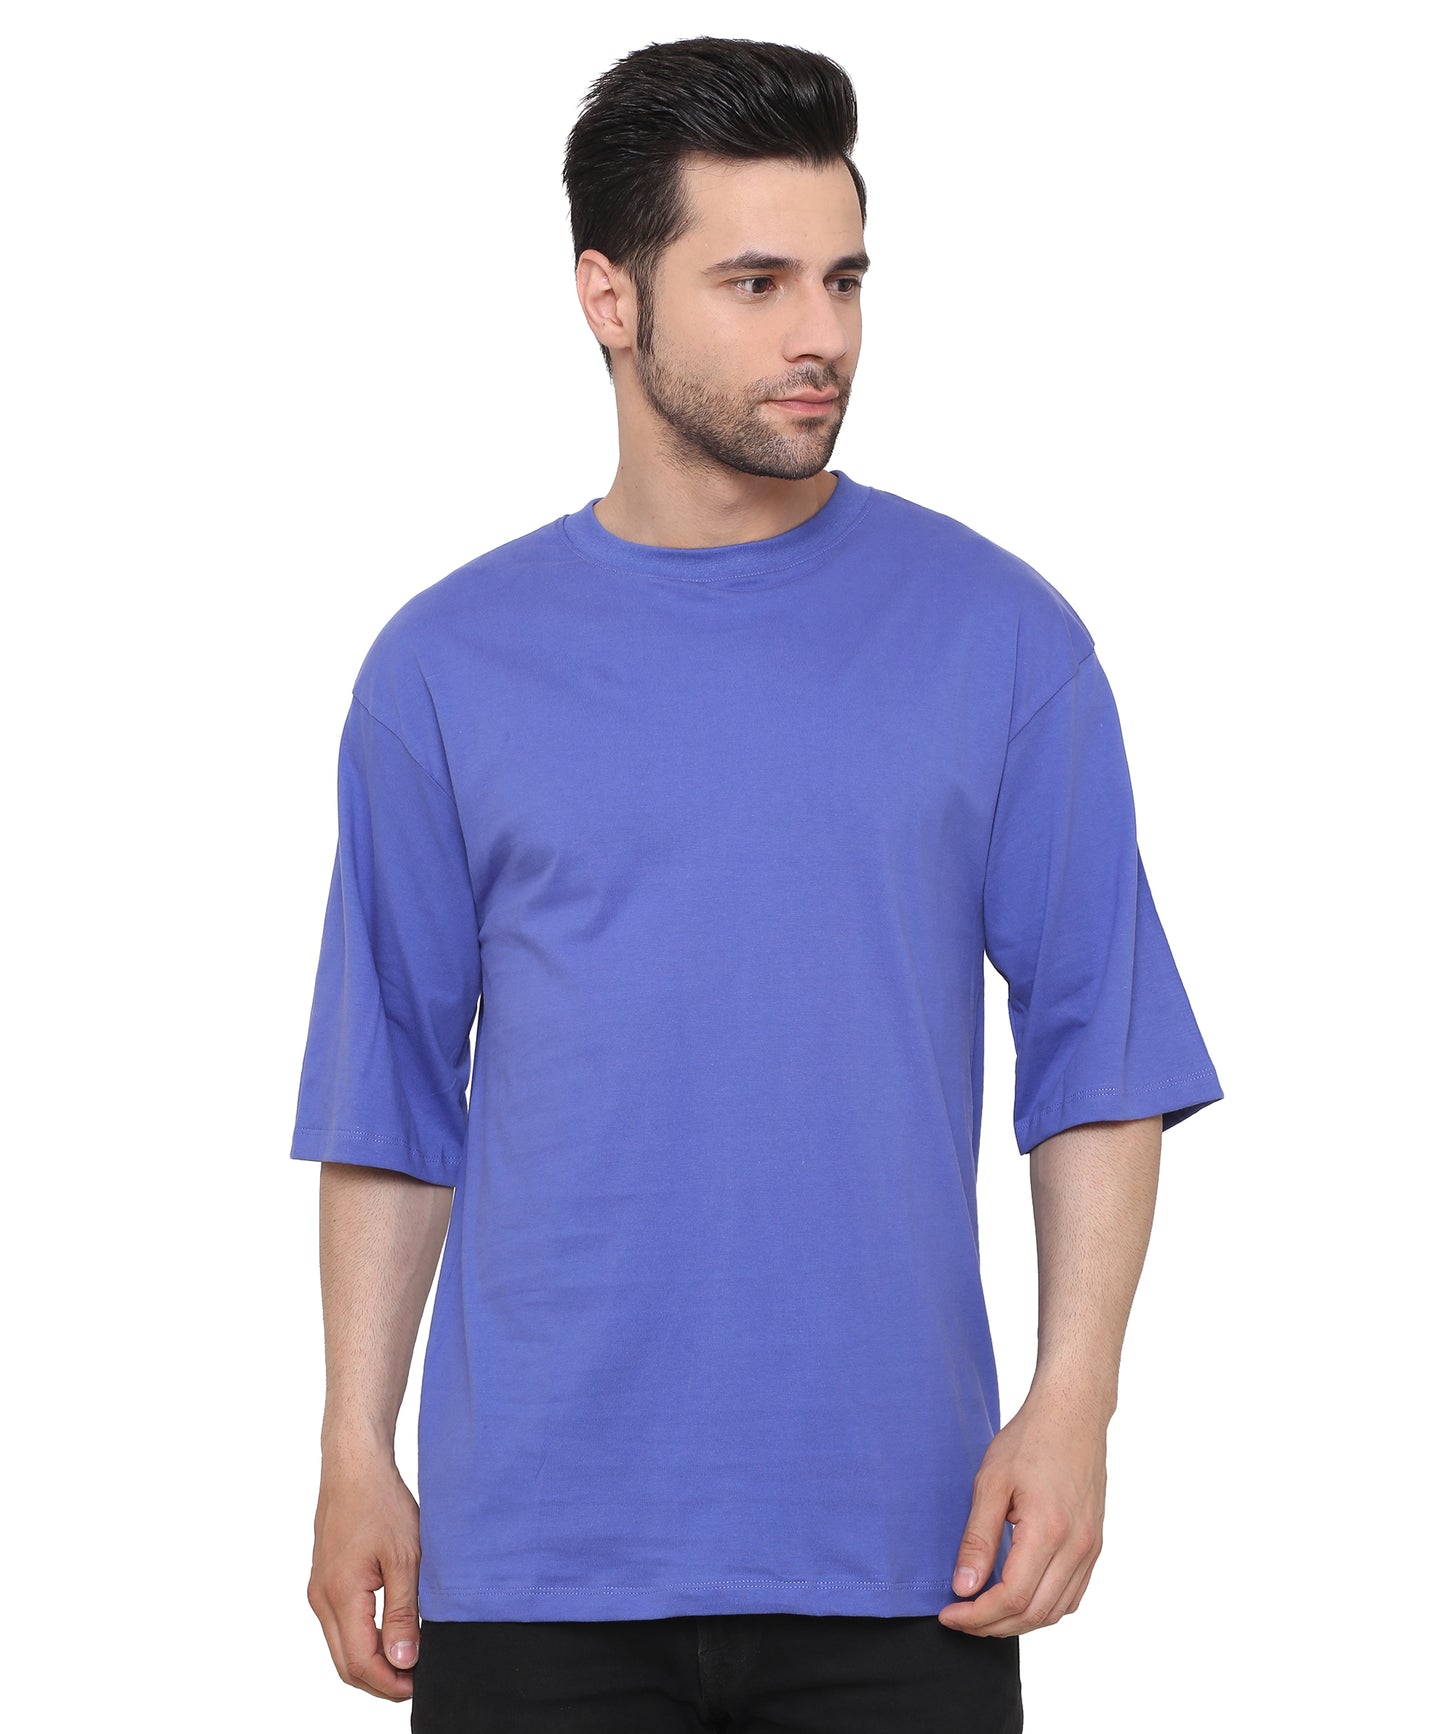 Blue Marguerite Oversized Cotton T-shirts Relaxed Fit Tees for Men